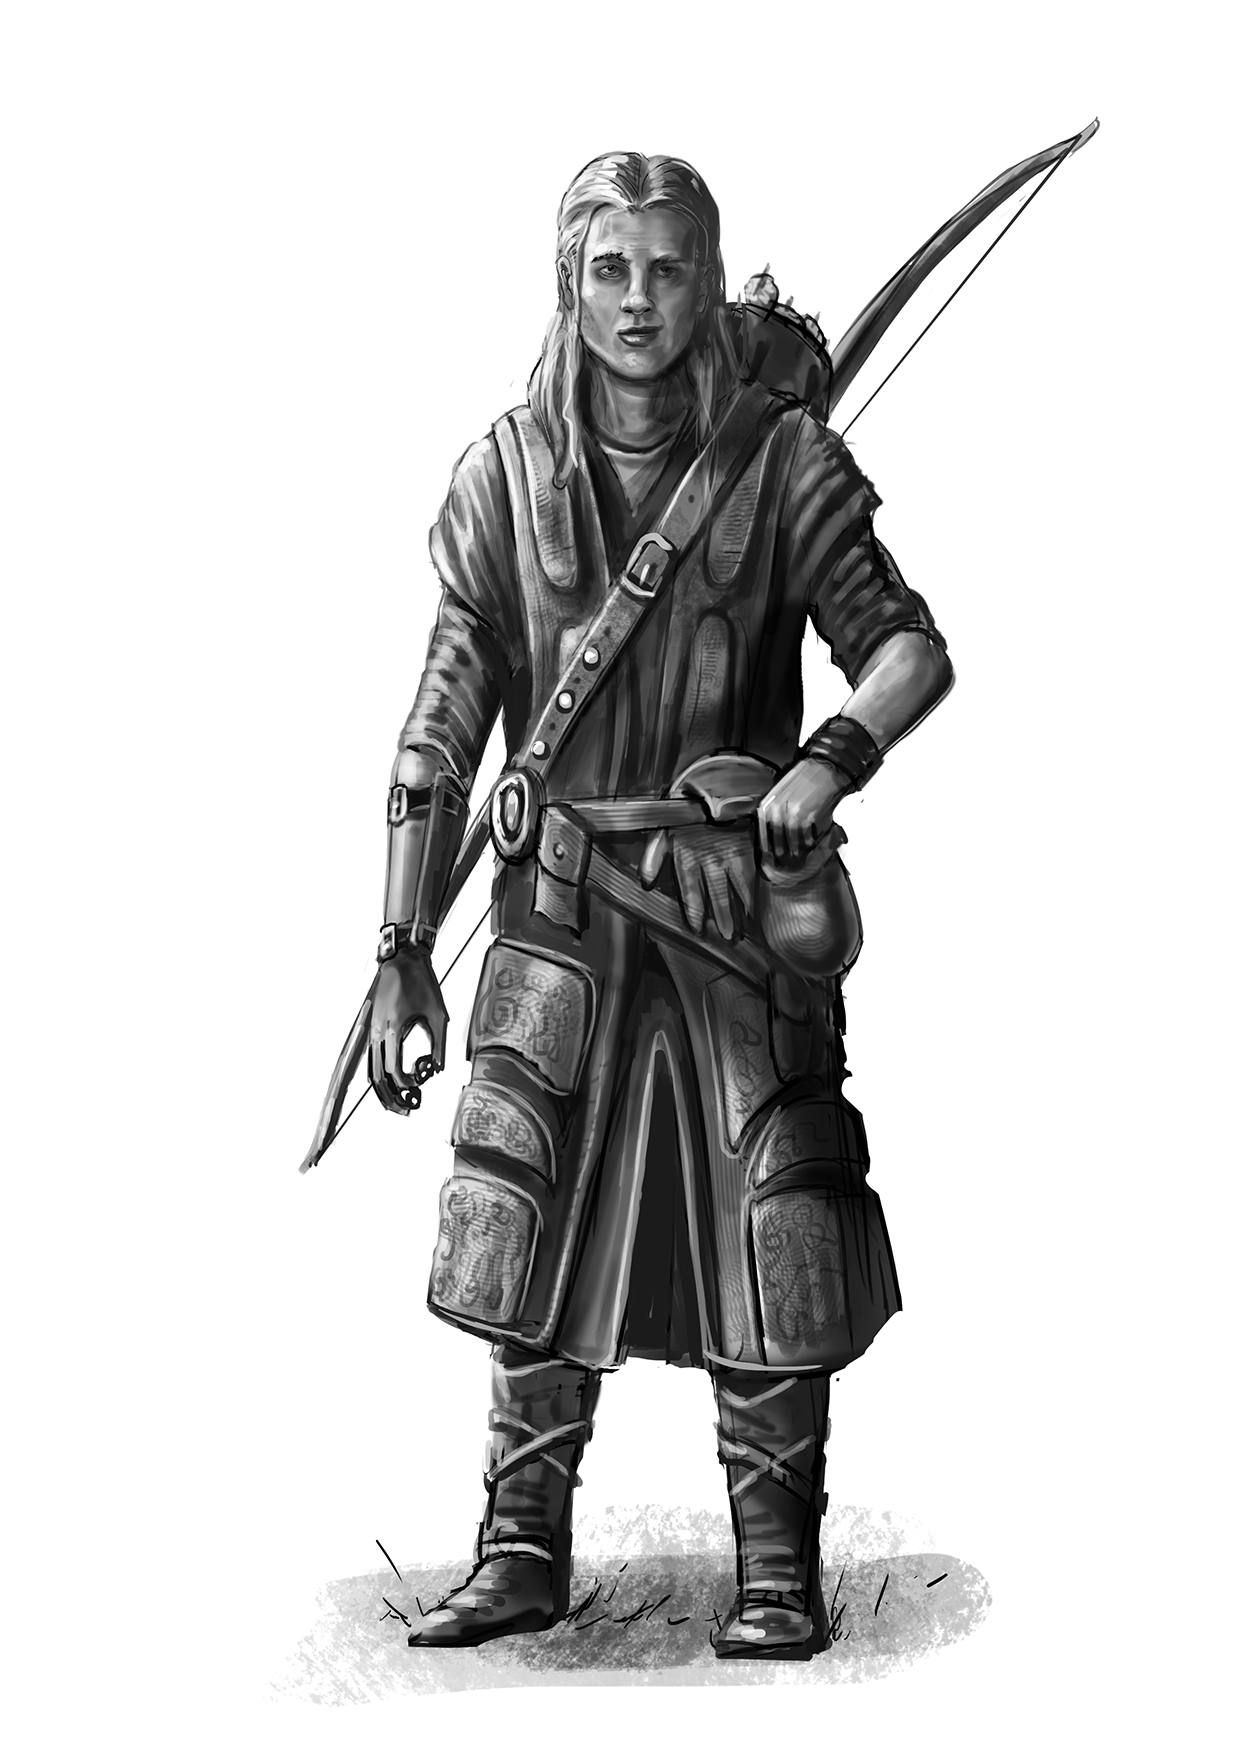 Fantasy character art for the Rune Fire Cycle, by The Noble Artist